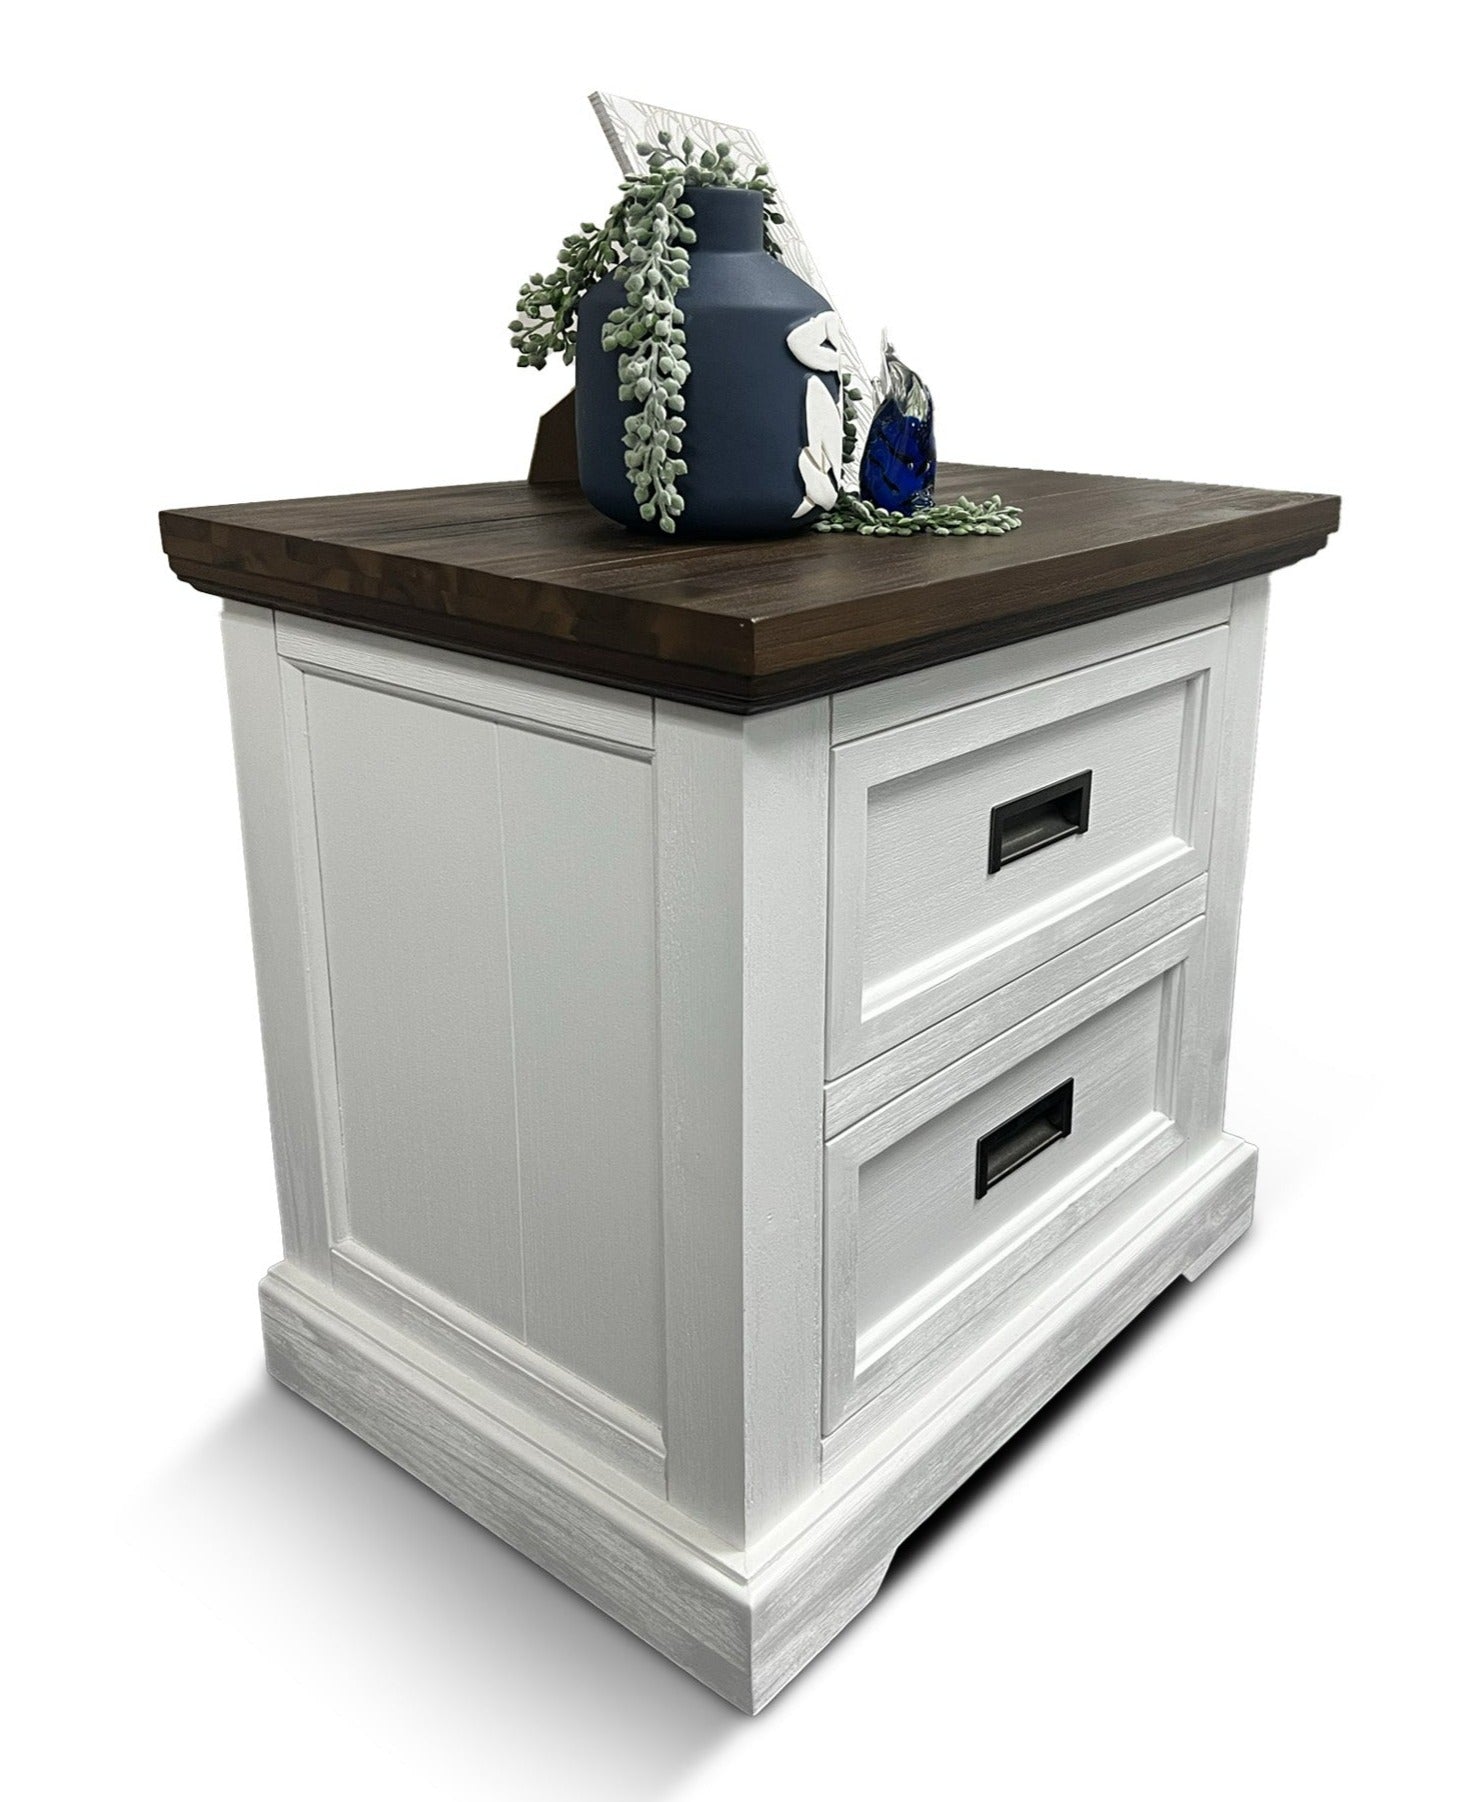 Hamptons bedside chest two tone finish